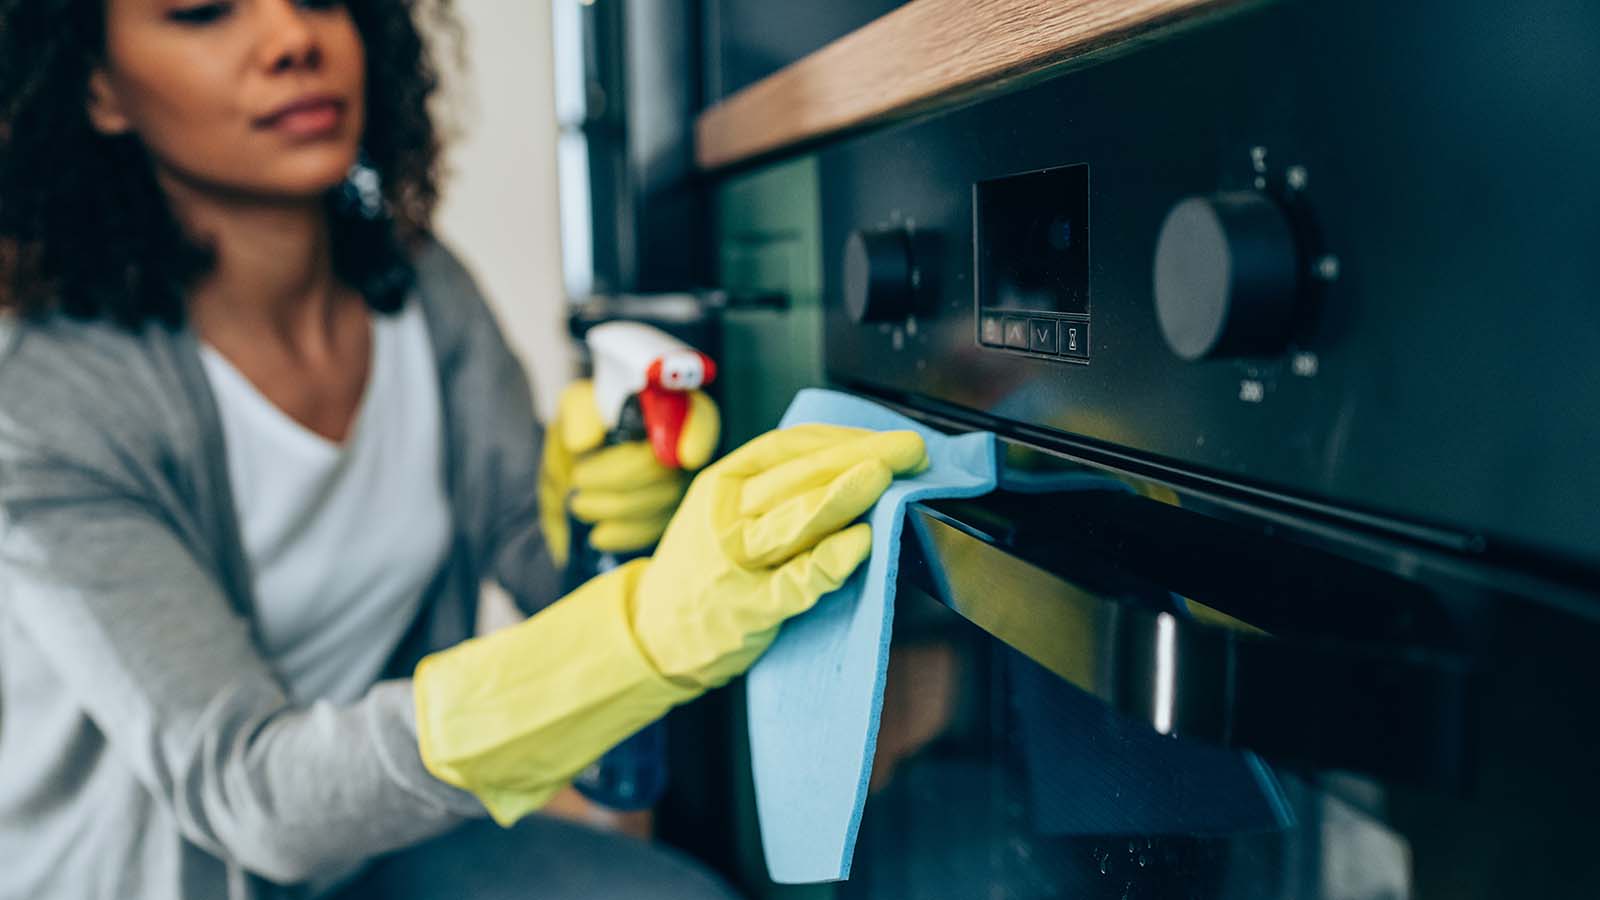 How to actually clean your oven and stovetop, according to experts | CNN Underscored